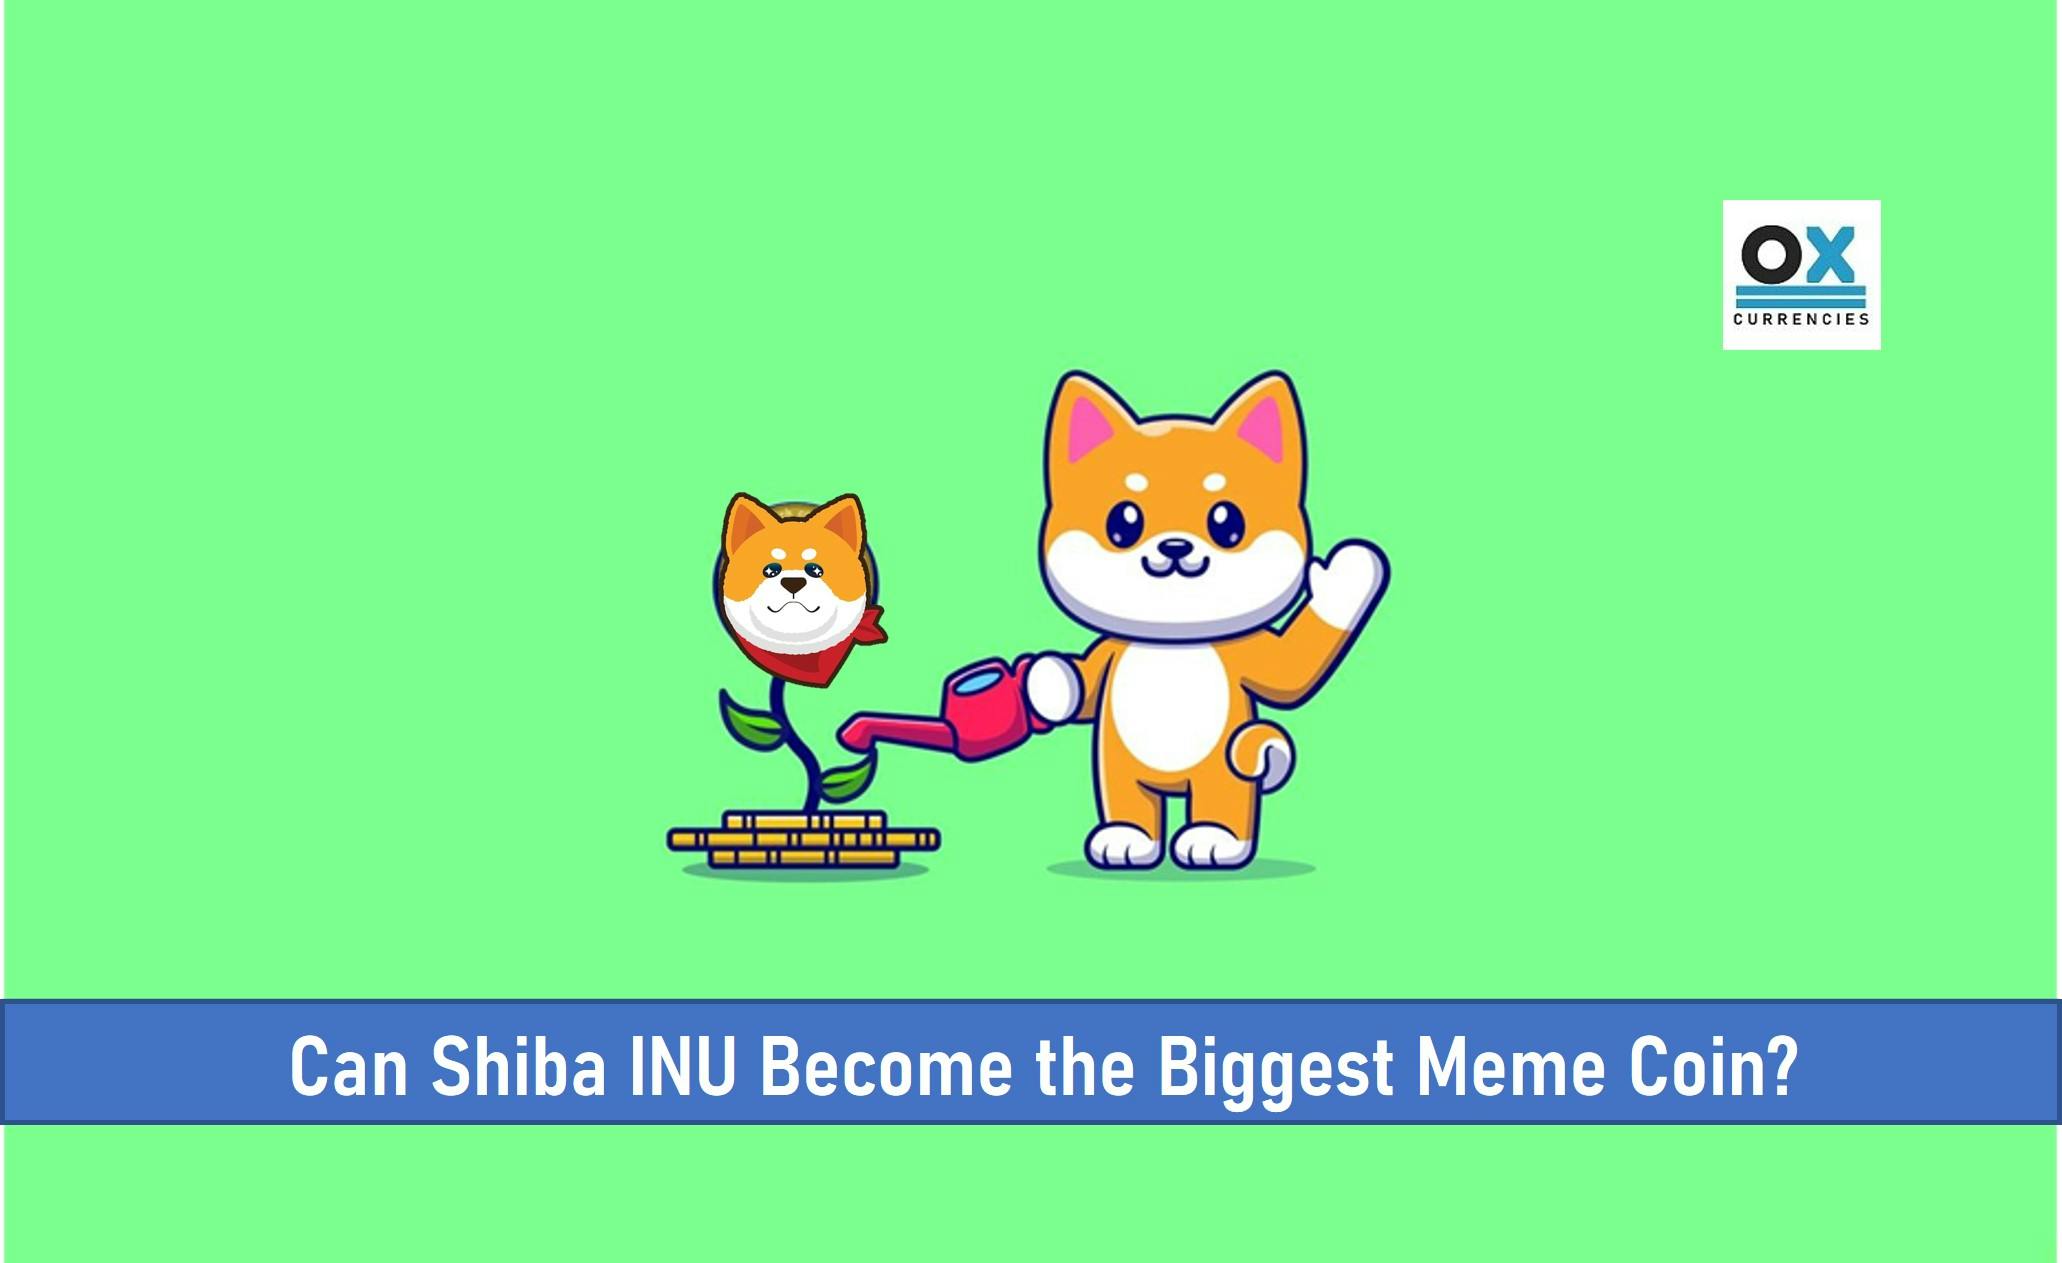 Can Shiba INU Become the Biggest Meme Coin?